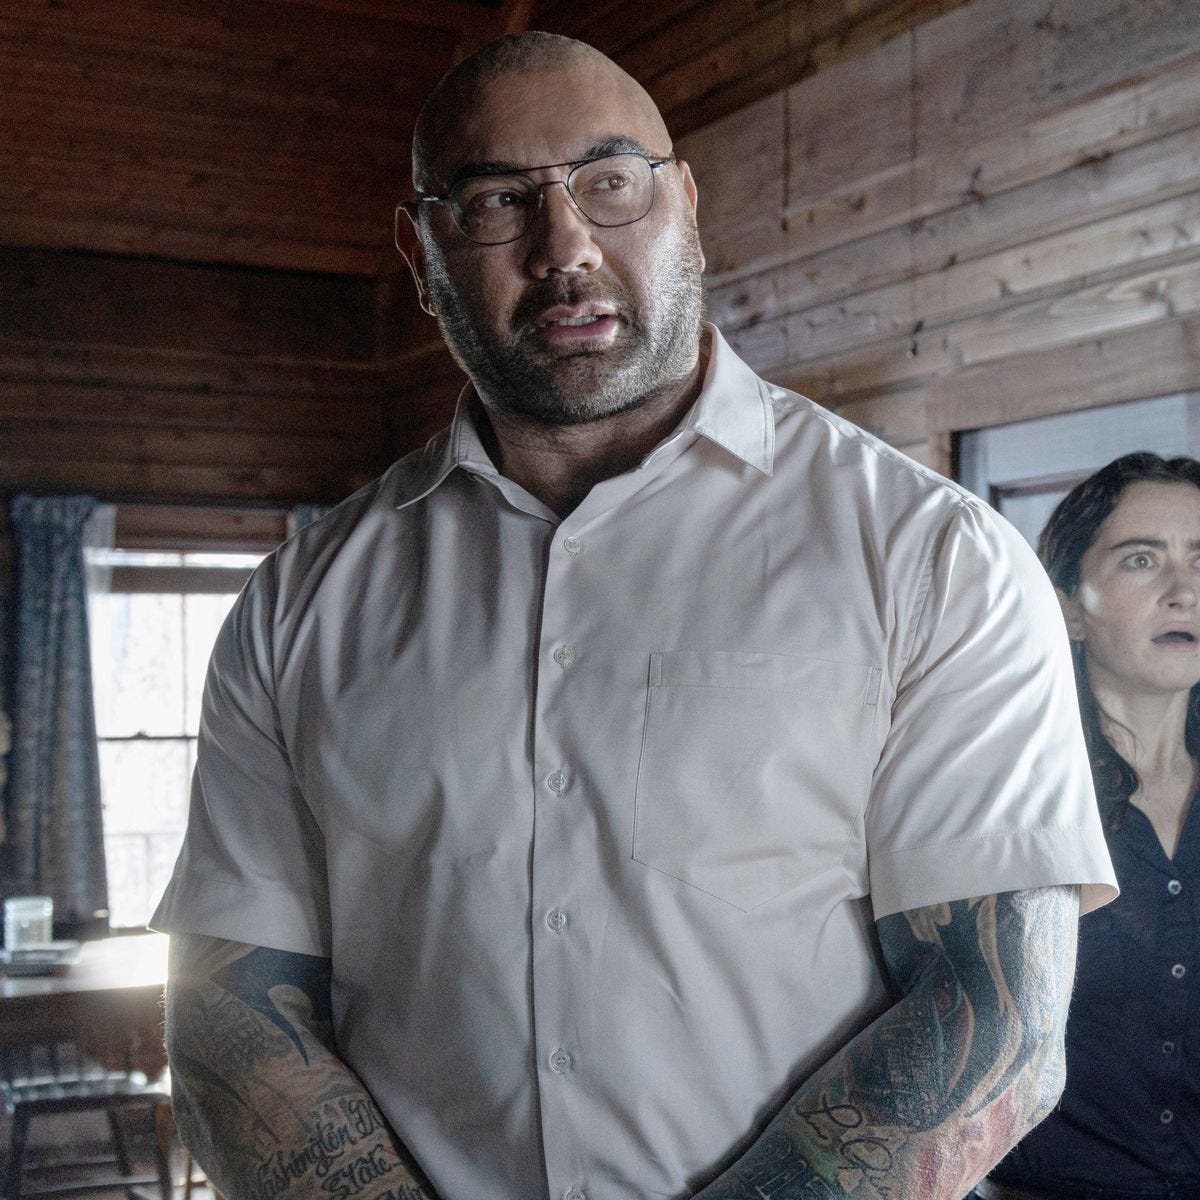 Dave Bautista turns sinister in Knock at the Cabin first trailer